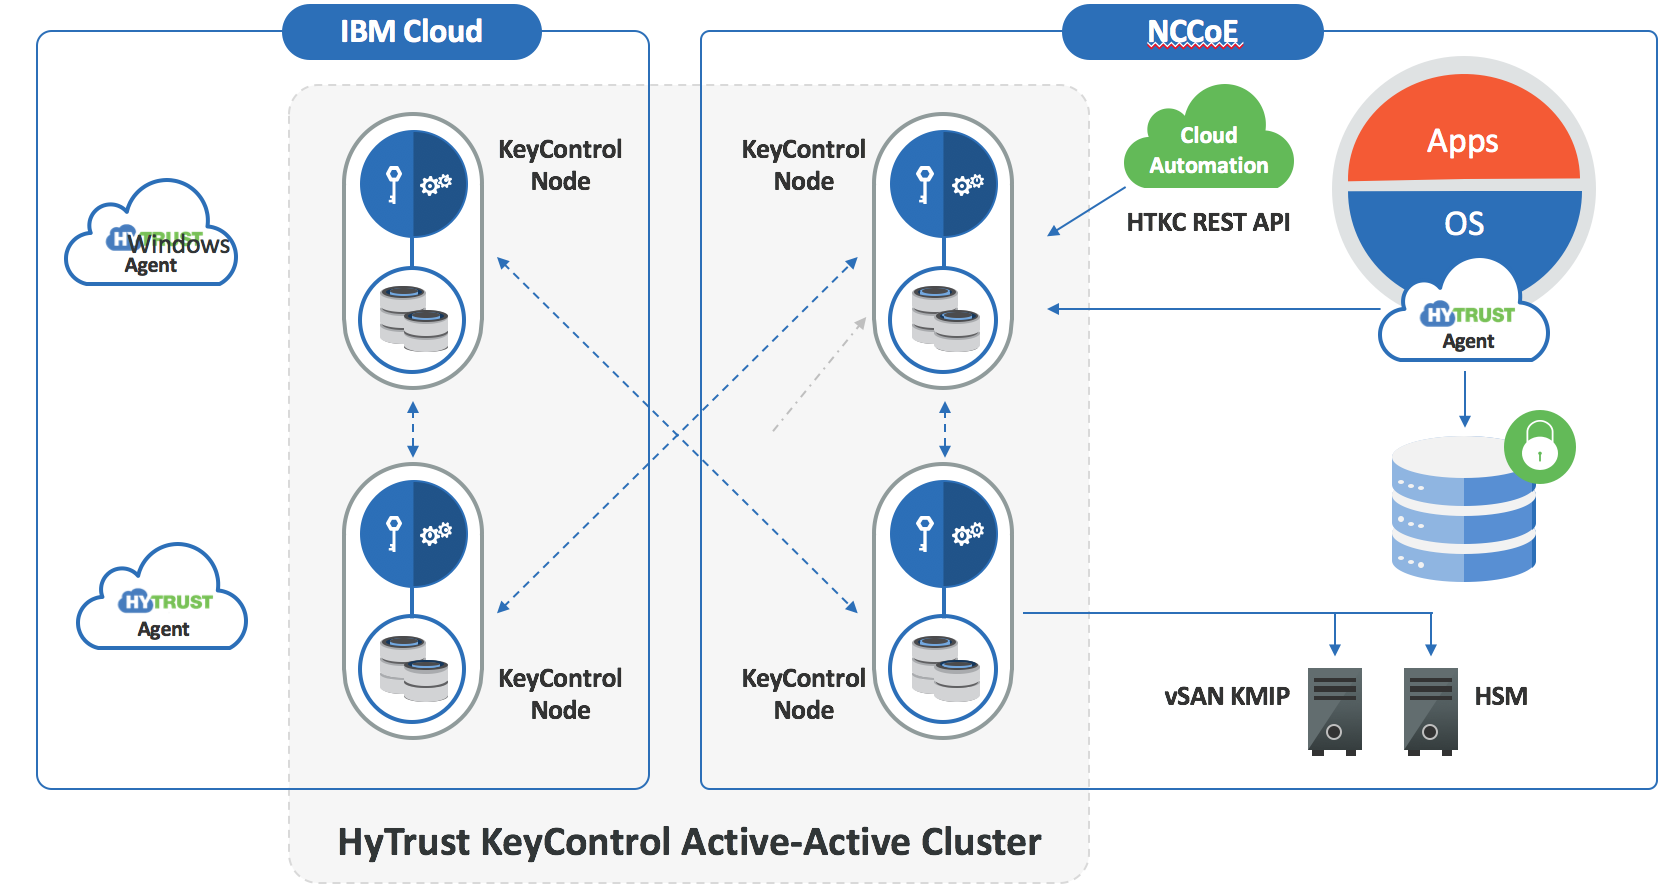 This figure depicts the HyTrust KeyControl active-active cluster.